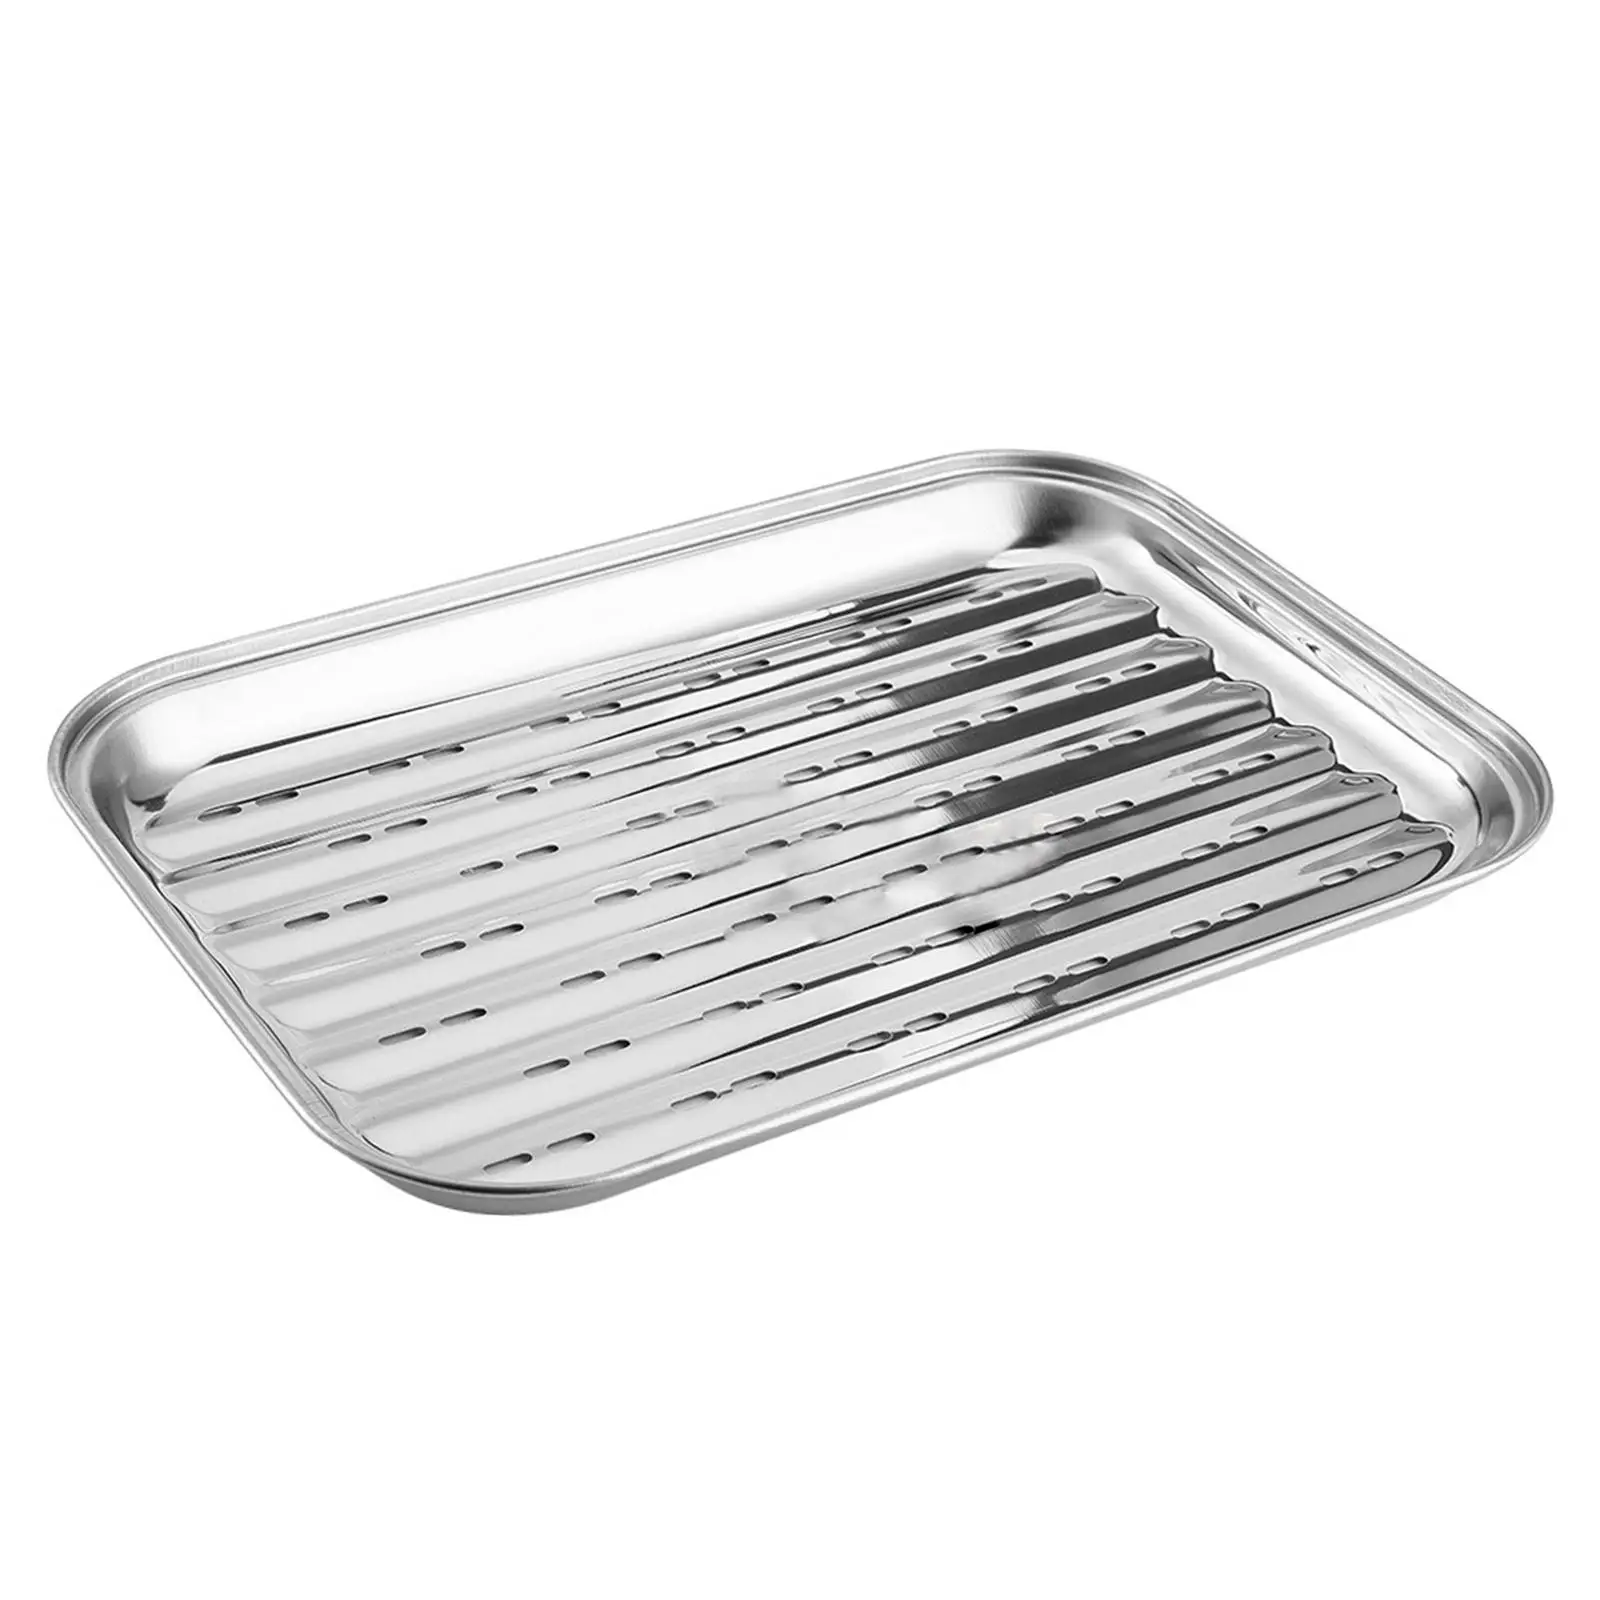 Grill Basket Roasting Pan Nonstick Grill Pans for Indoor Outdoor Kitchen BBQ